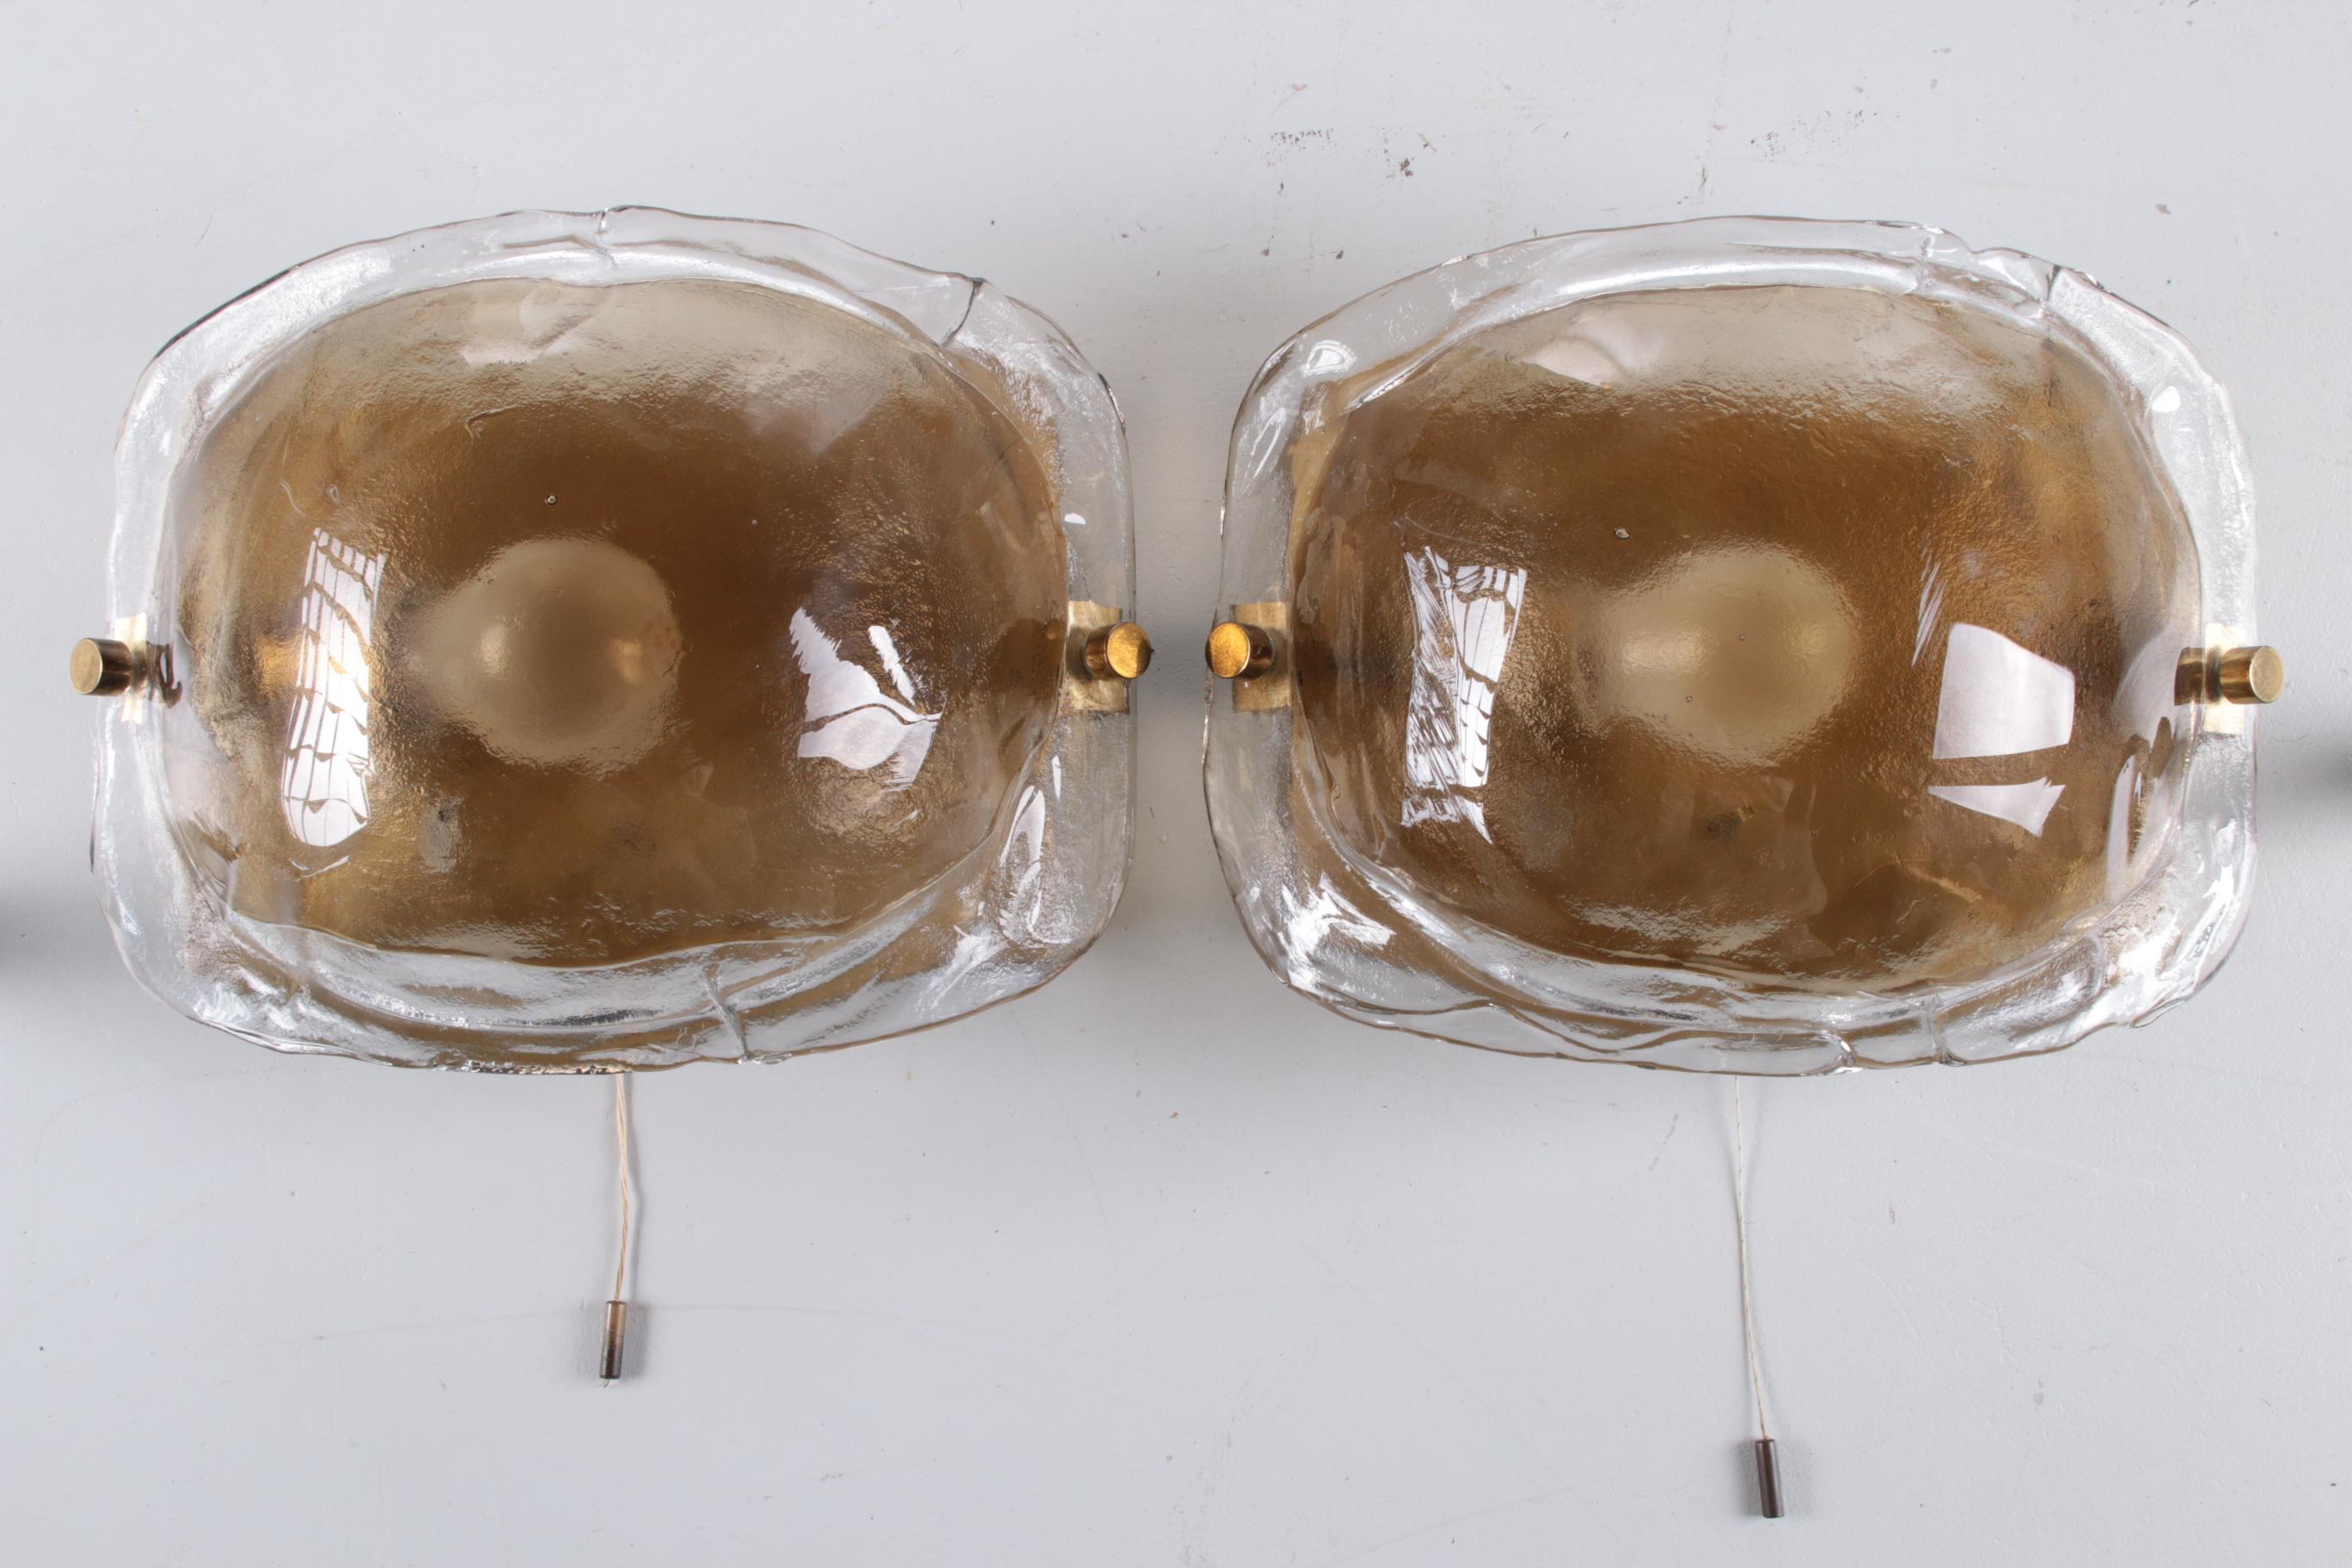 Set of two amber wall lamps in murano glass by Kaiser Leuchten

A pair of beautiful 1970s wall lamps in Murano glass with brass detail by Kaiser lighting.

The thick glass shades emit a warm diffused amber light.

The organic quality of the